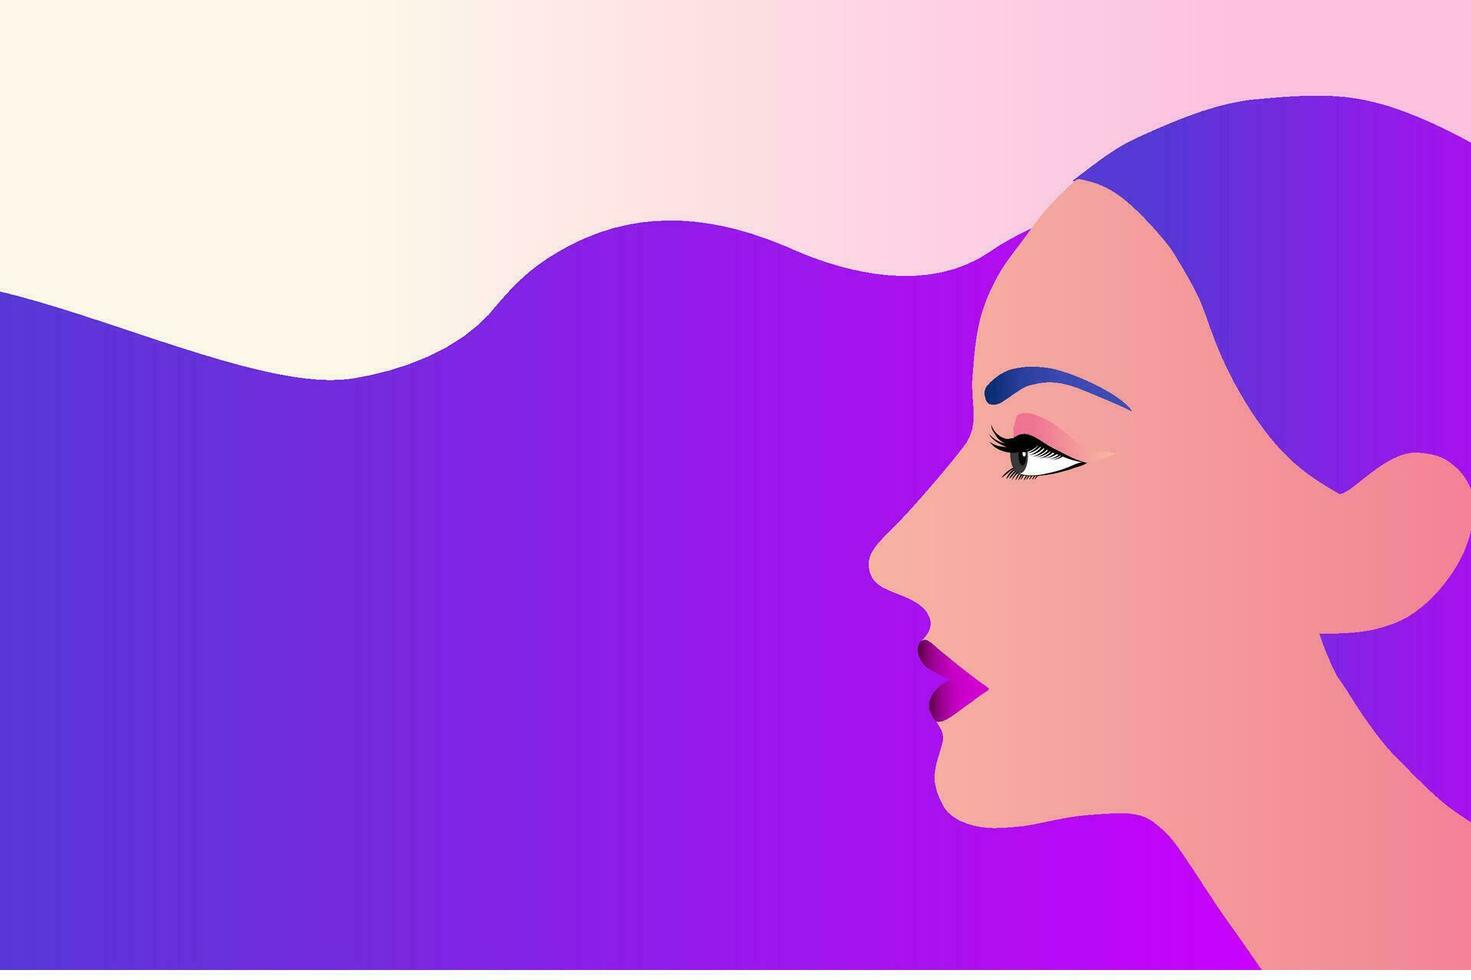 long hair woman side view face isolated vector illustration. Beauty and cosmetics design concept background